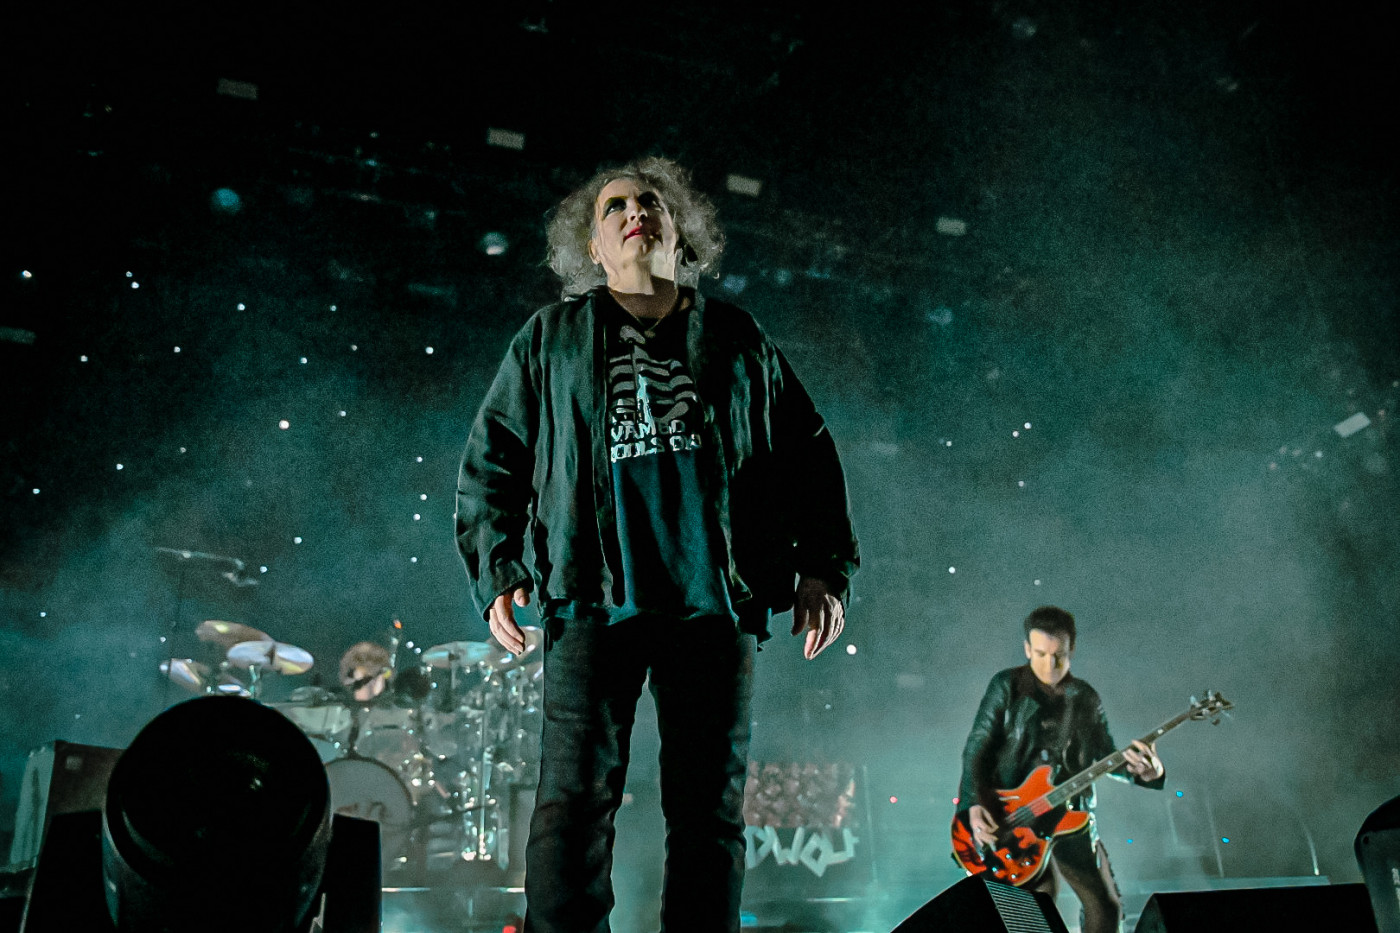 The Cure perform in Glasgow on 4th December 2022. Image: Calum Buchan